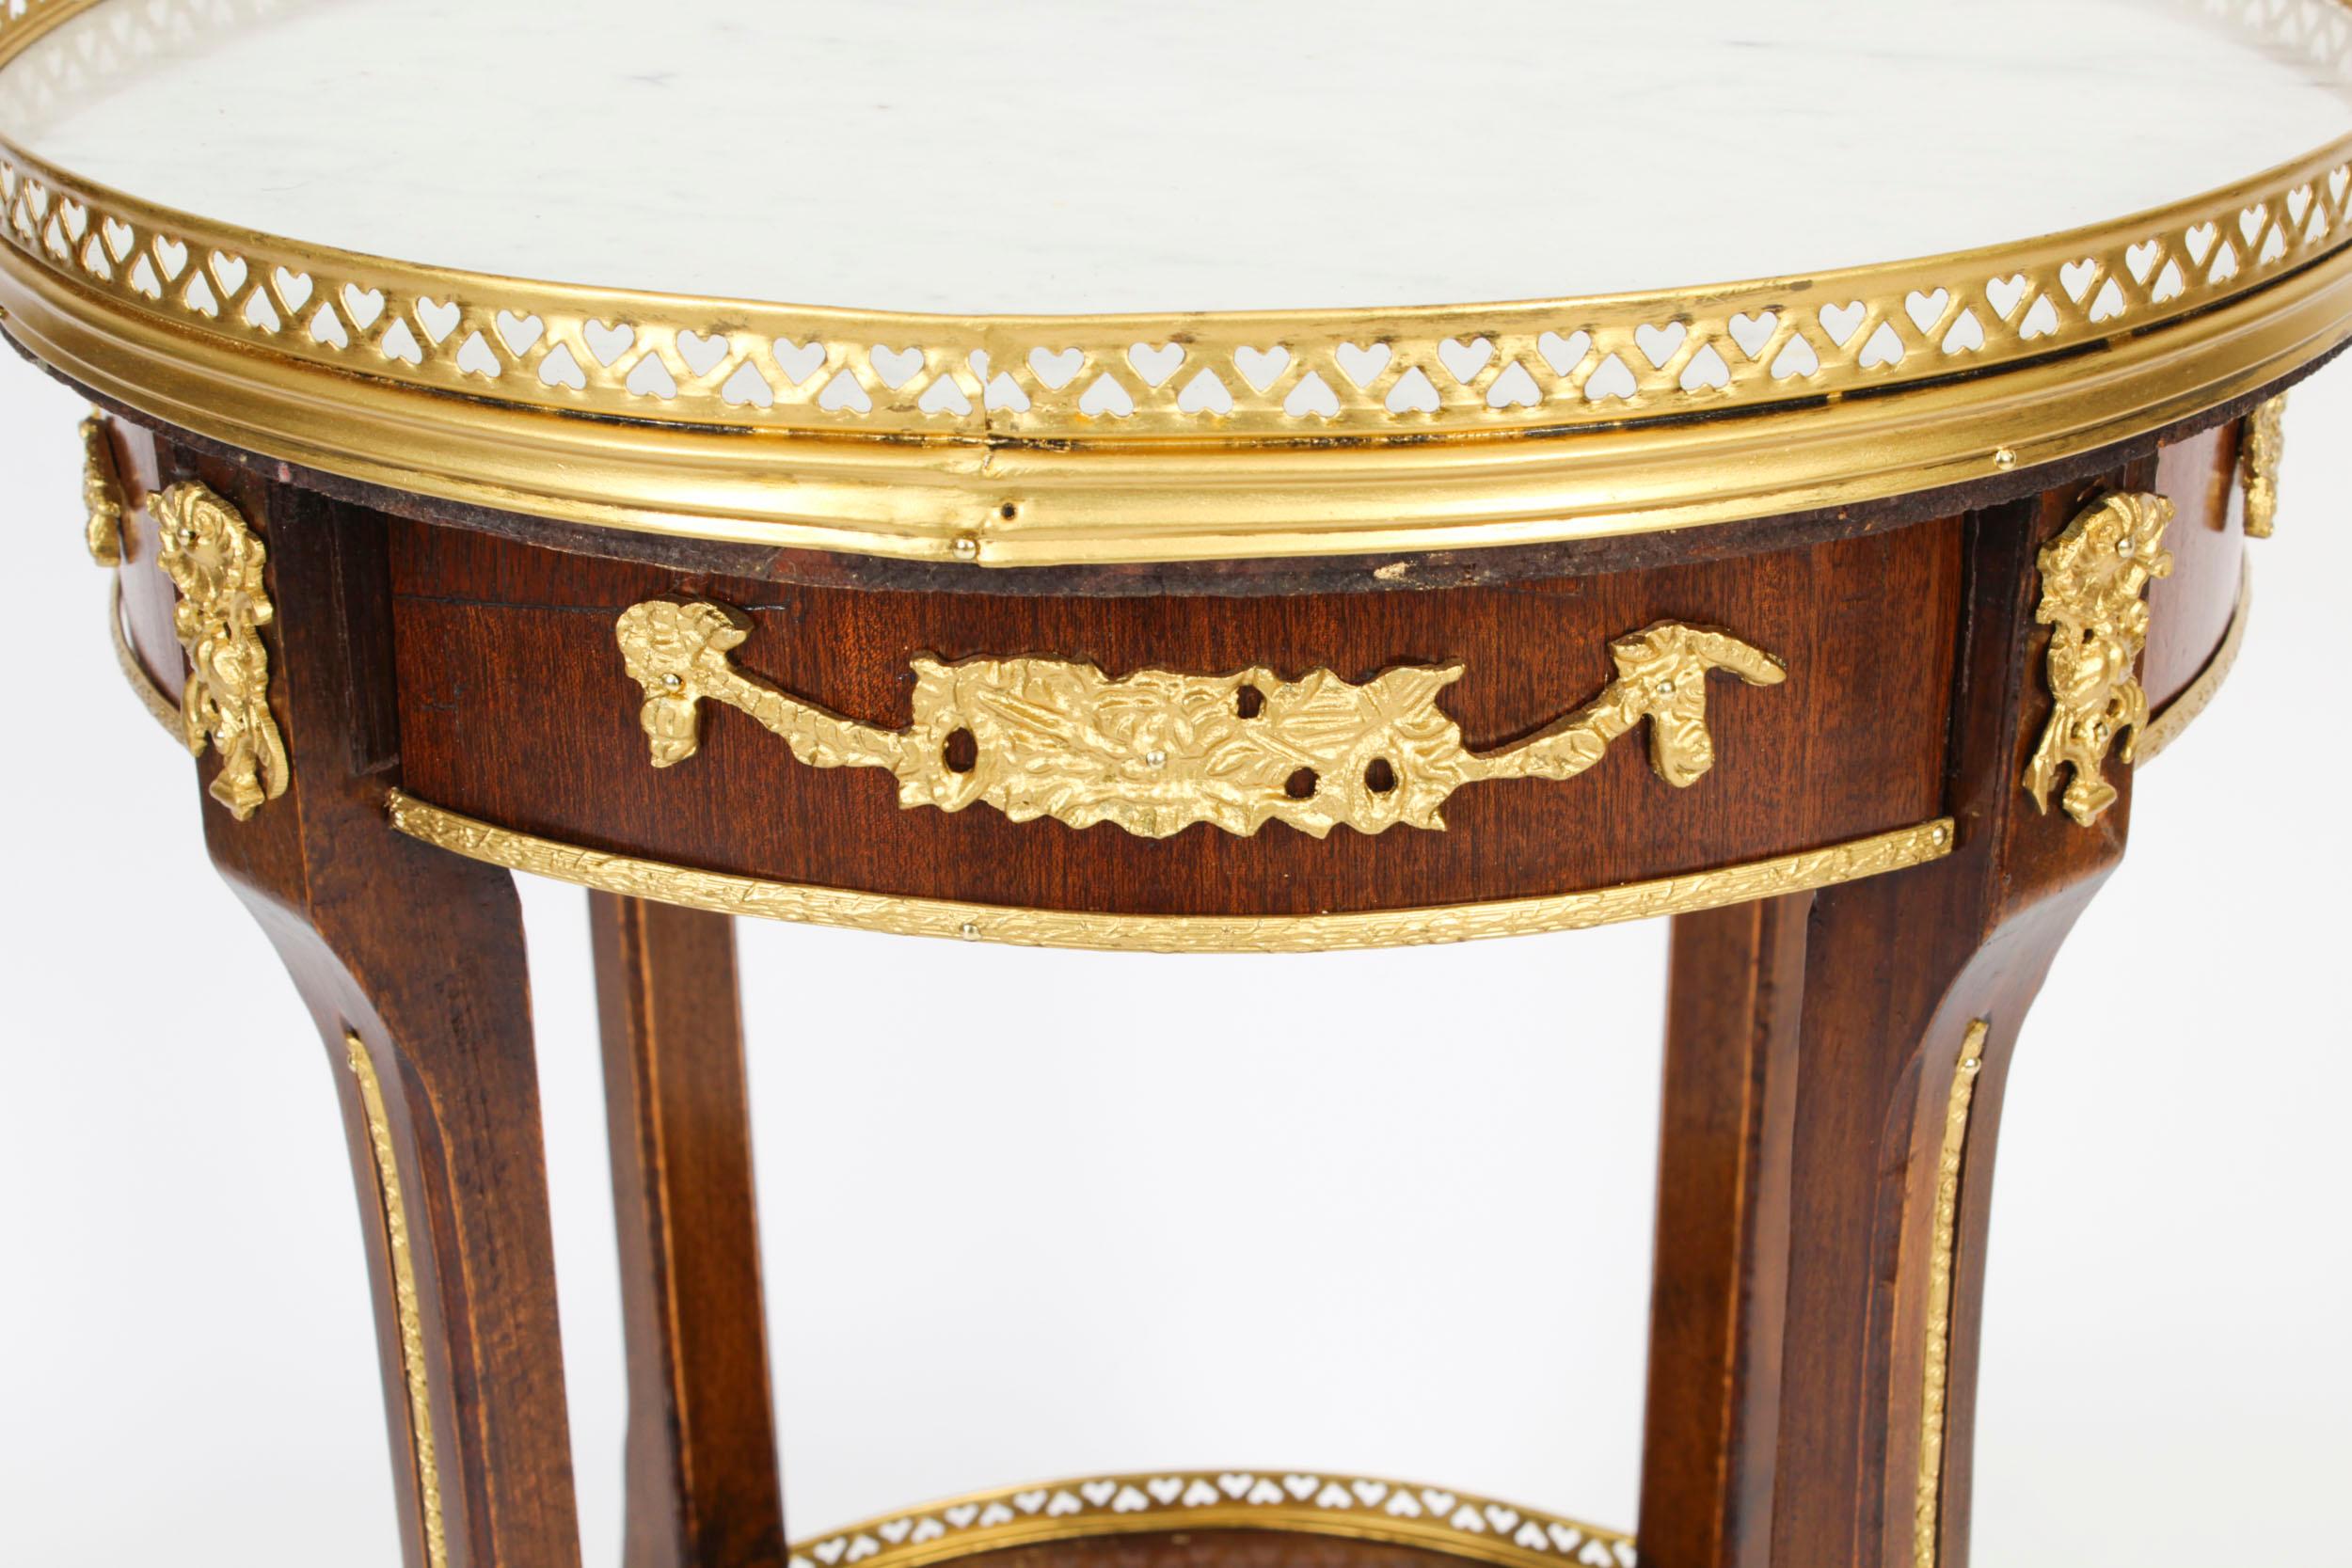 Antique French Empire Marble & Ormolu Occasional Table, 19th Century For Sale 4